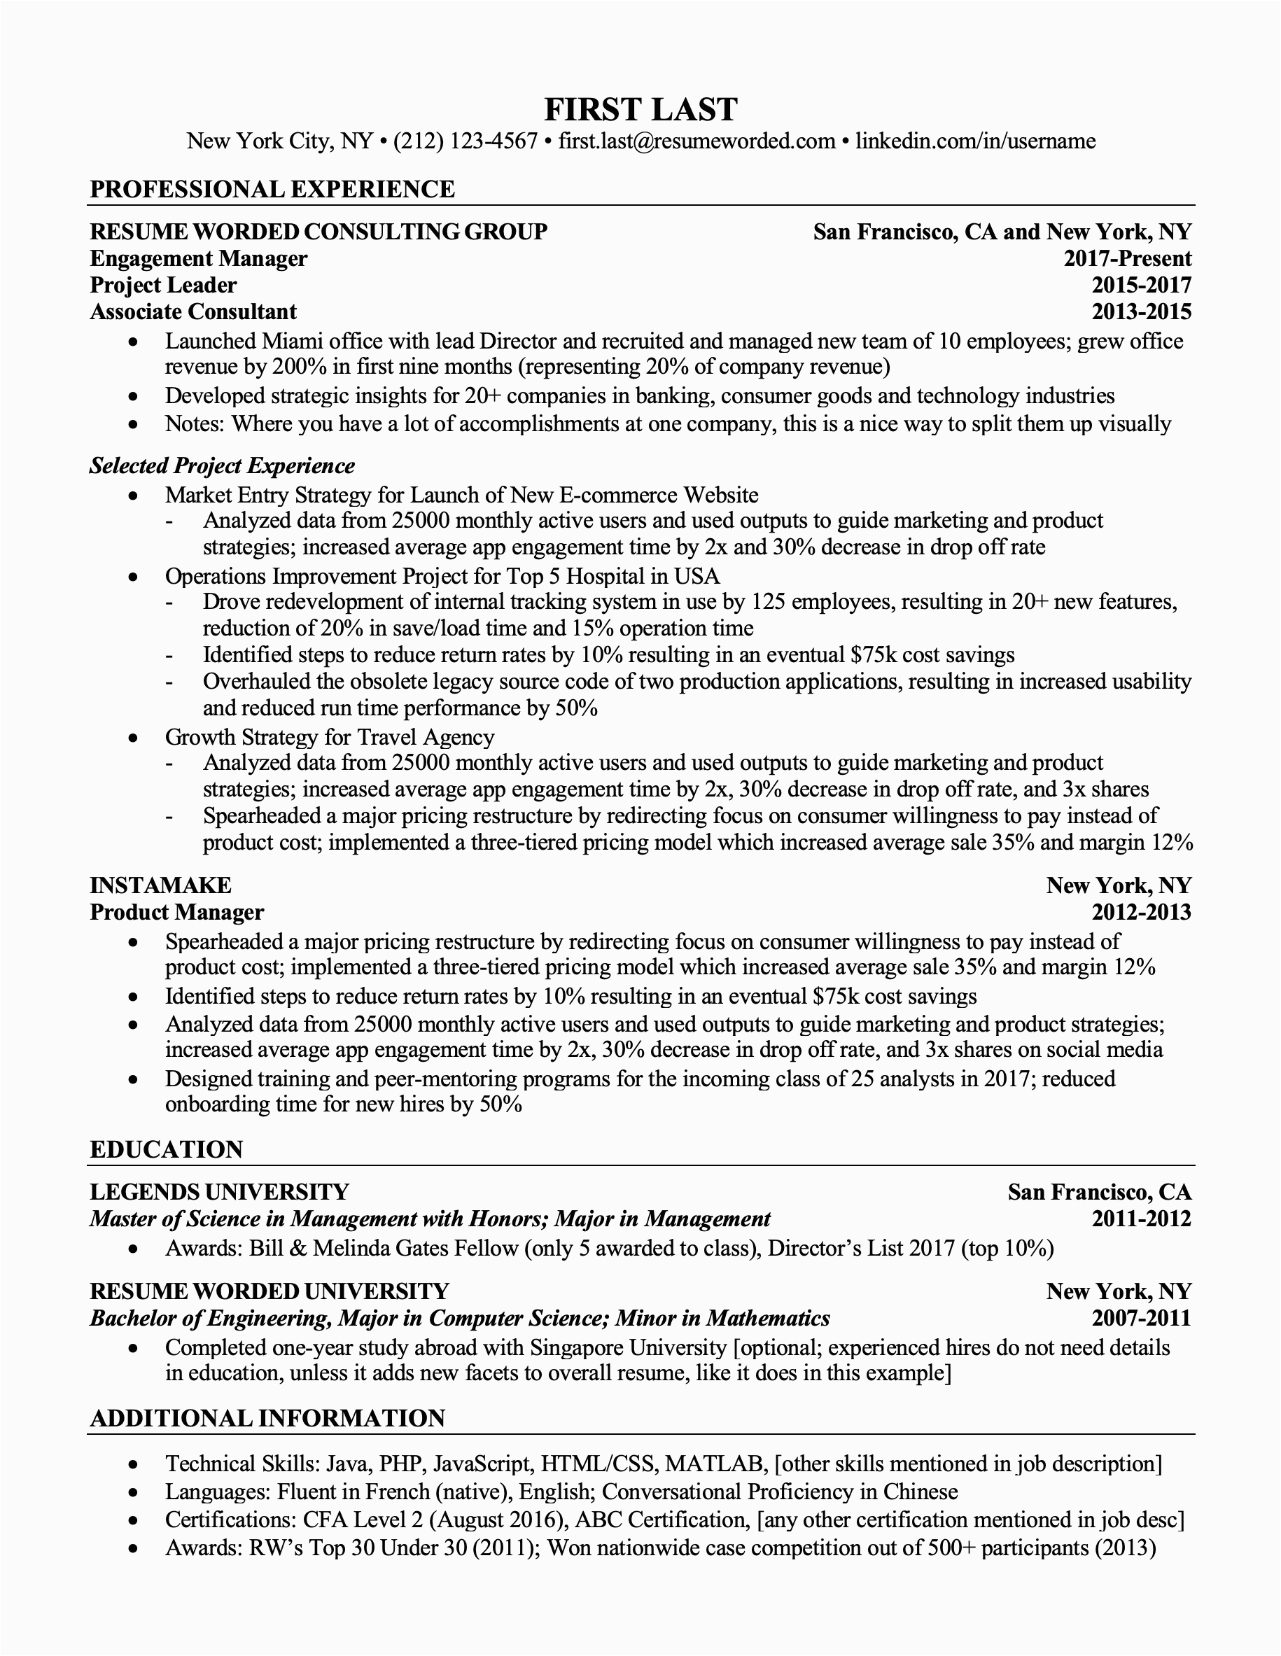 Sample Resume Same Company Multiple Positions Professional Sample Resume Multiple Positions Same Pany